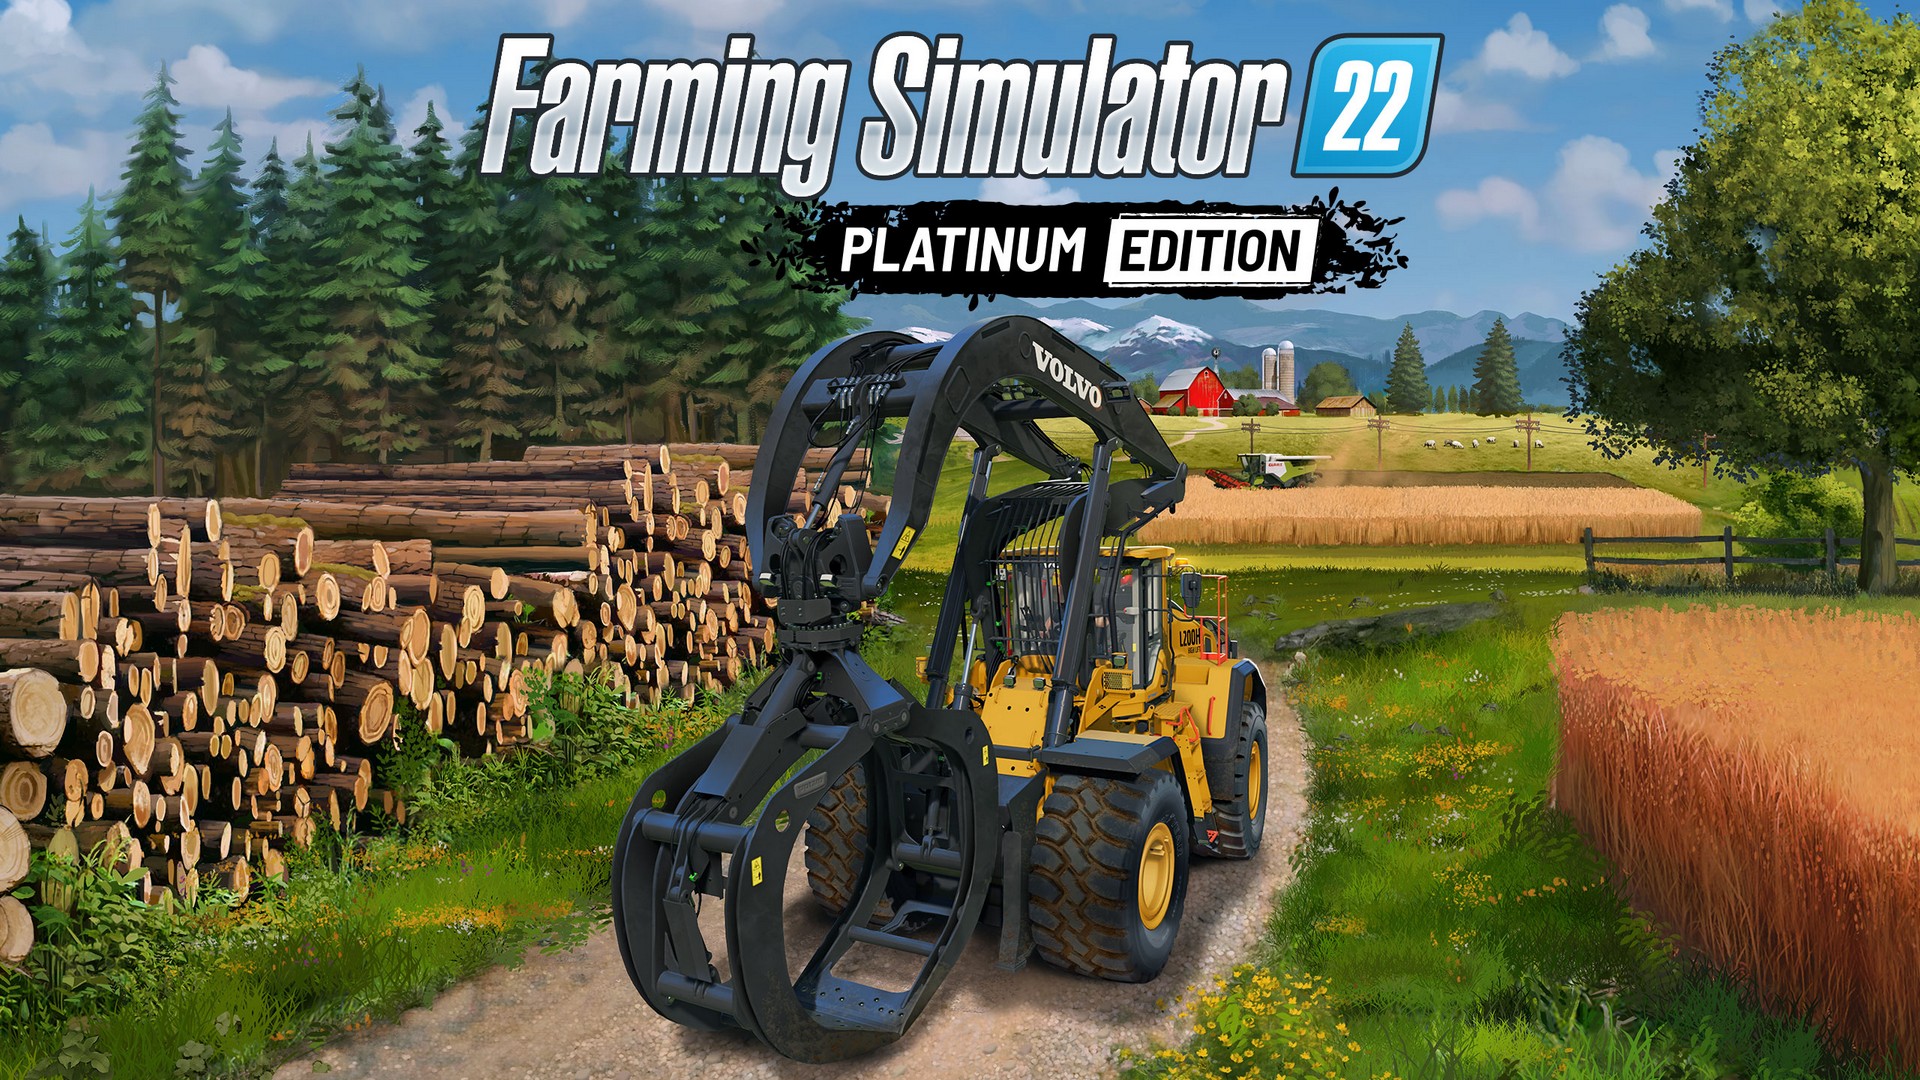 Farming Simulator 22 – Platinum Edition & Expansion Released as GIANTS Software Celebrates 4 Million Copies Sold